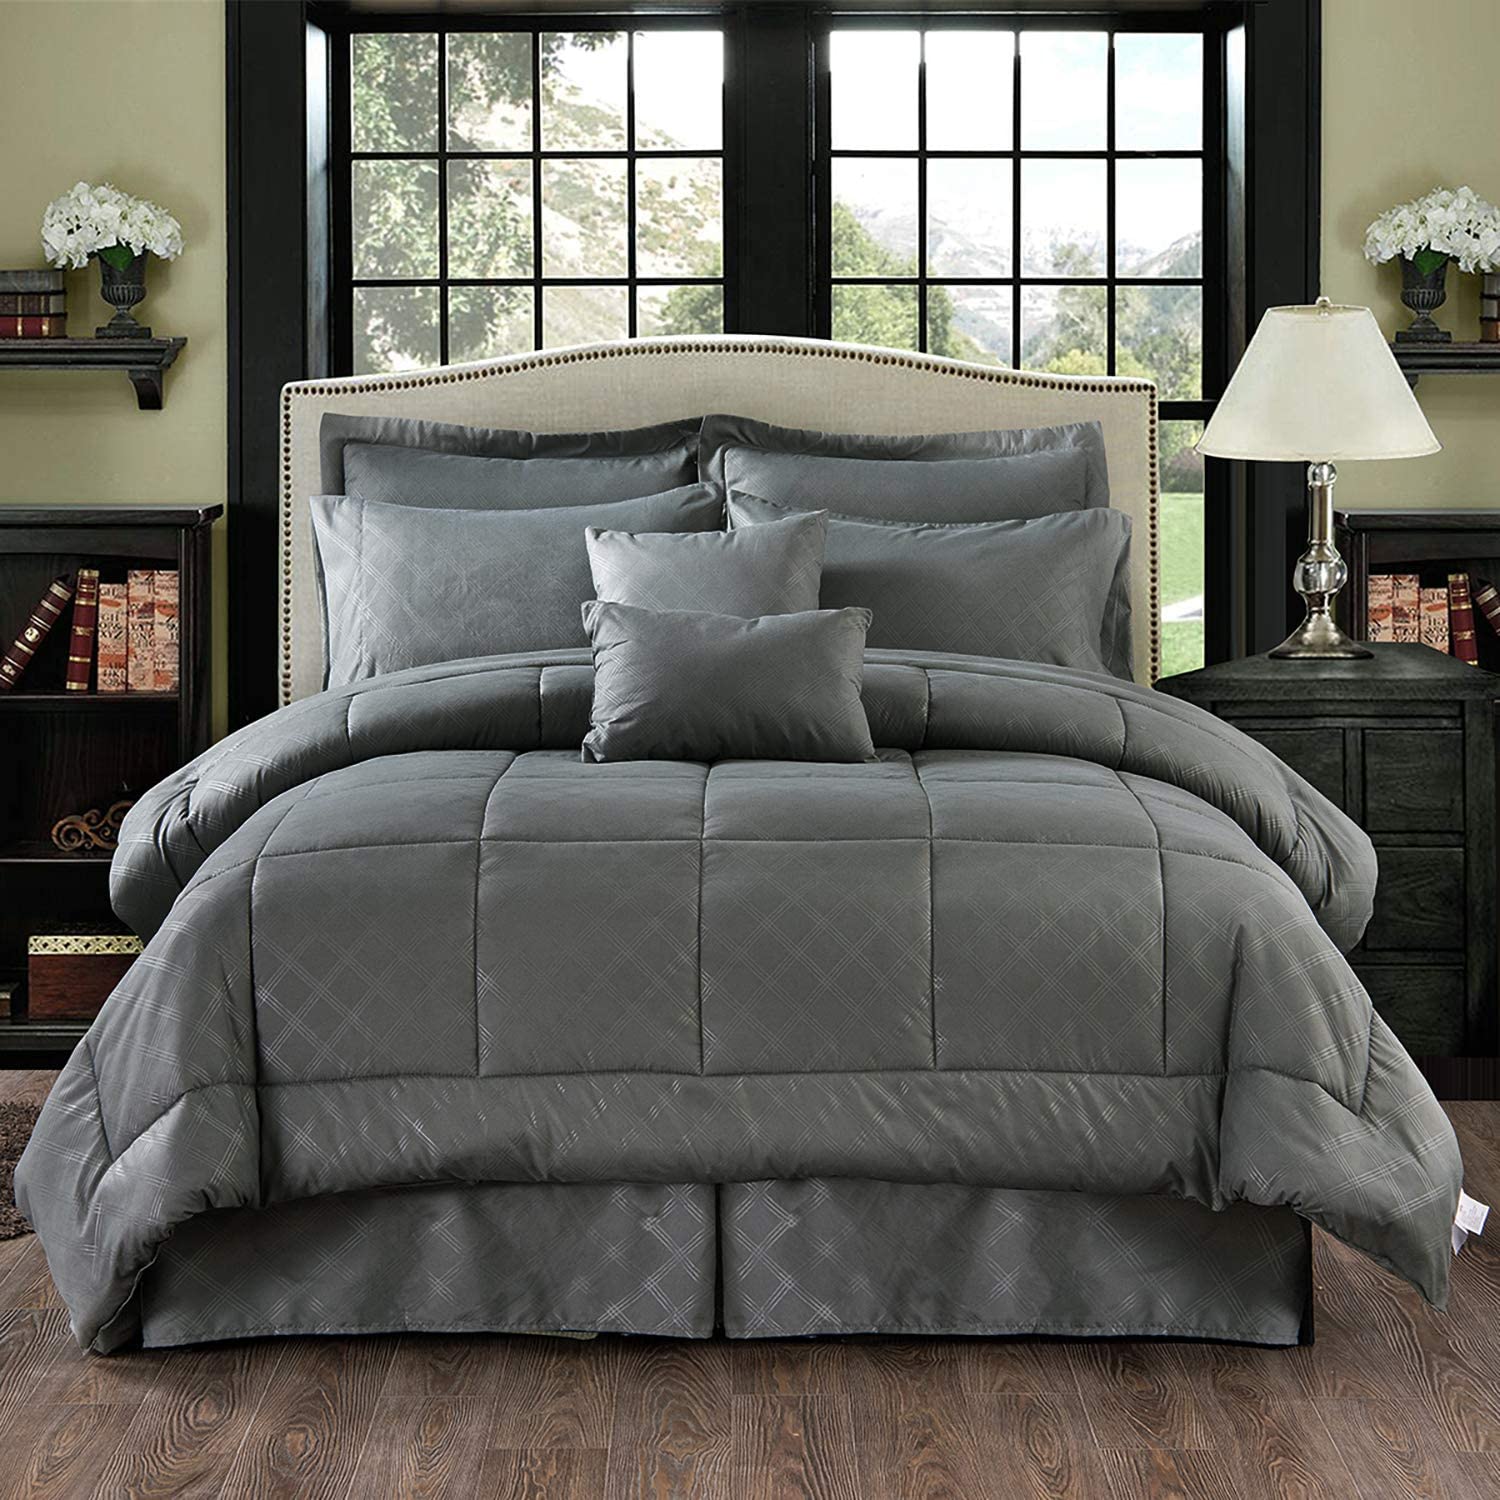 10 Piece Comforter Bedding Set with Sheet Set Fit 14" Details about   MERRY HOME Comforter Set 